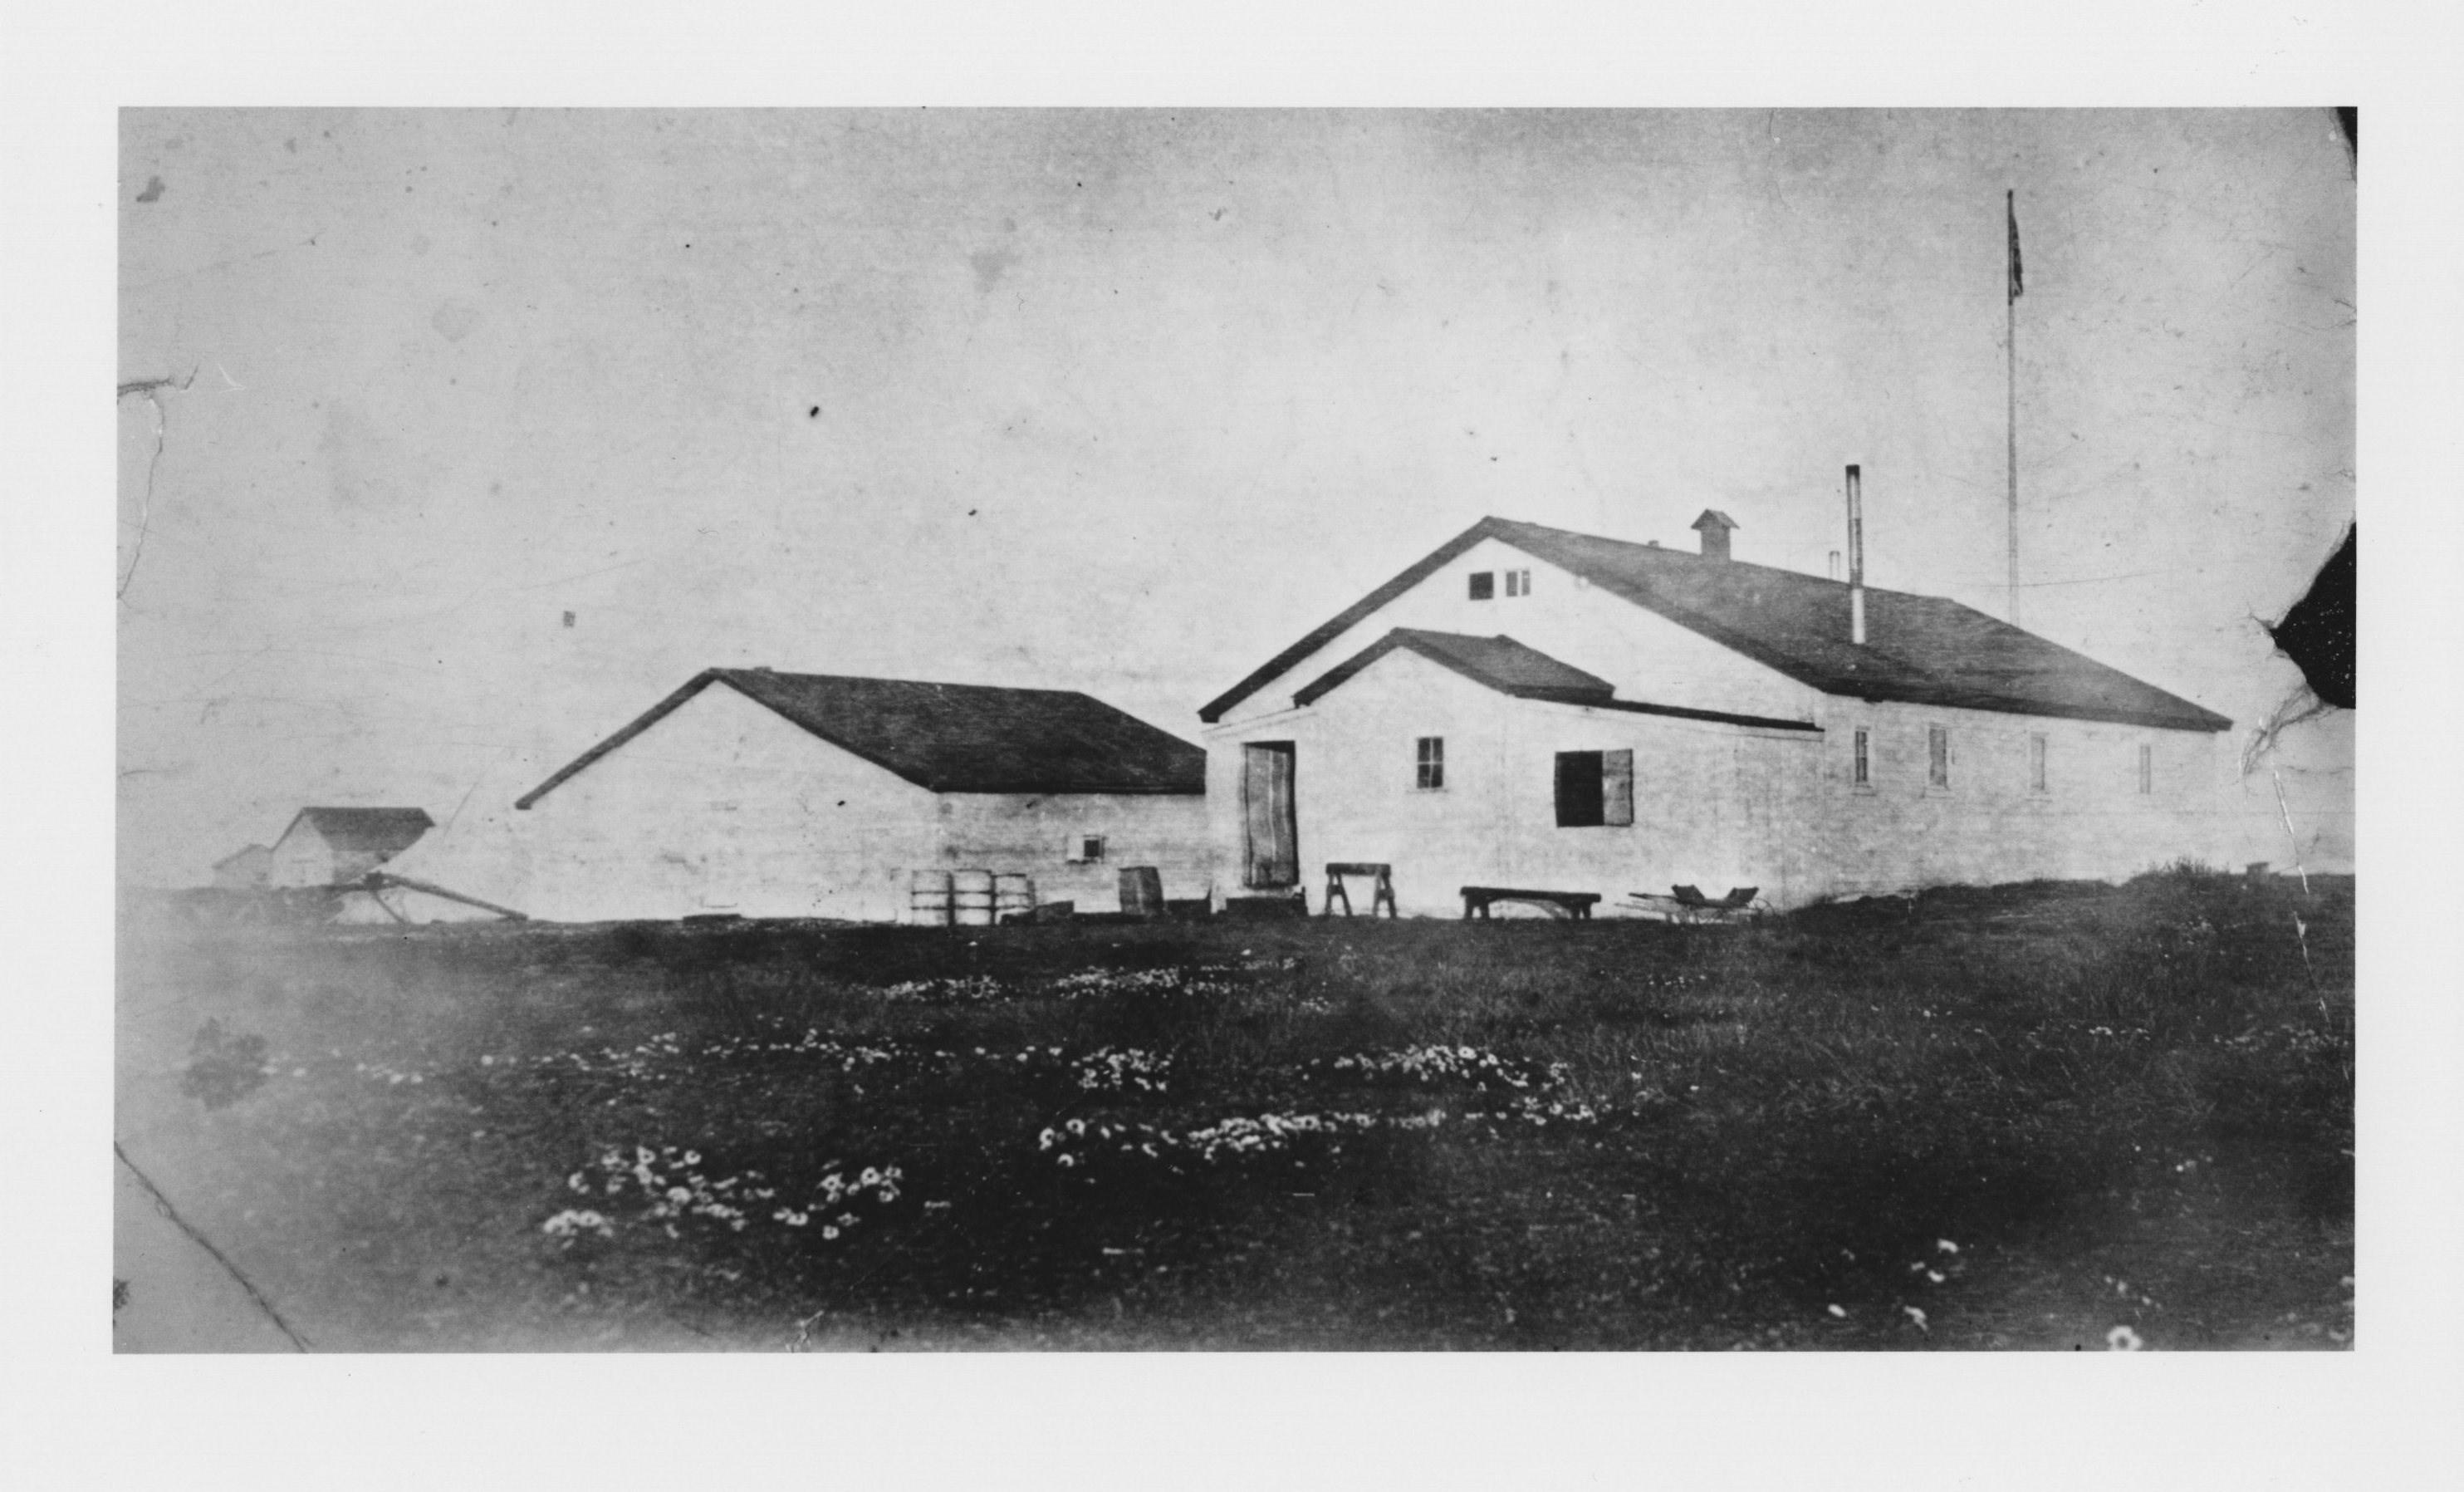 Inglangasuk, Lennie, “RCMP Building,” Inuvialuit Cultural Centre Digital Library, accessed April 21, 2020, https://inuvialuitdigitallibrary.ca/items/show/3398. Photo Source: Inuvialuit Cultural Centre Digital Library.